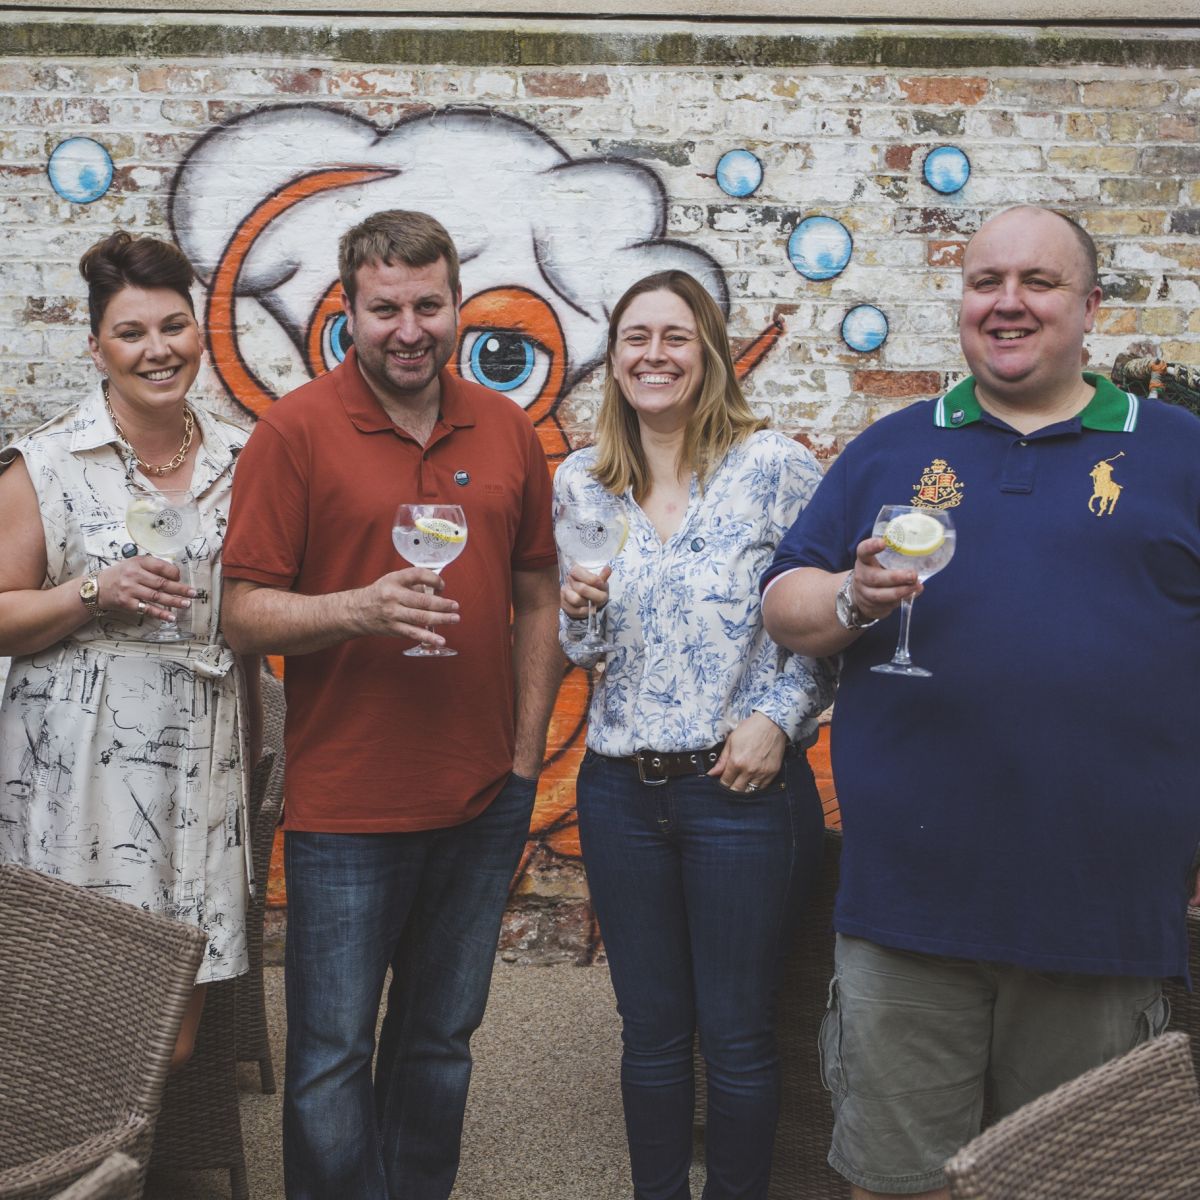 Owners of Humber St. Distillery and Fish Company celebrate the launch of the Trawler strength gin